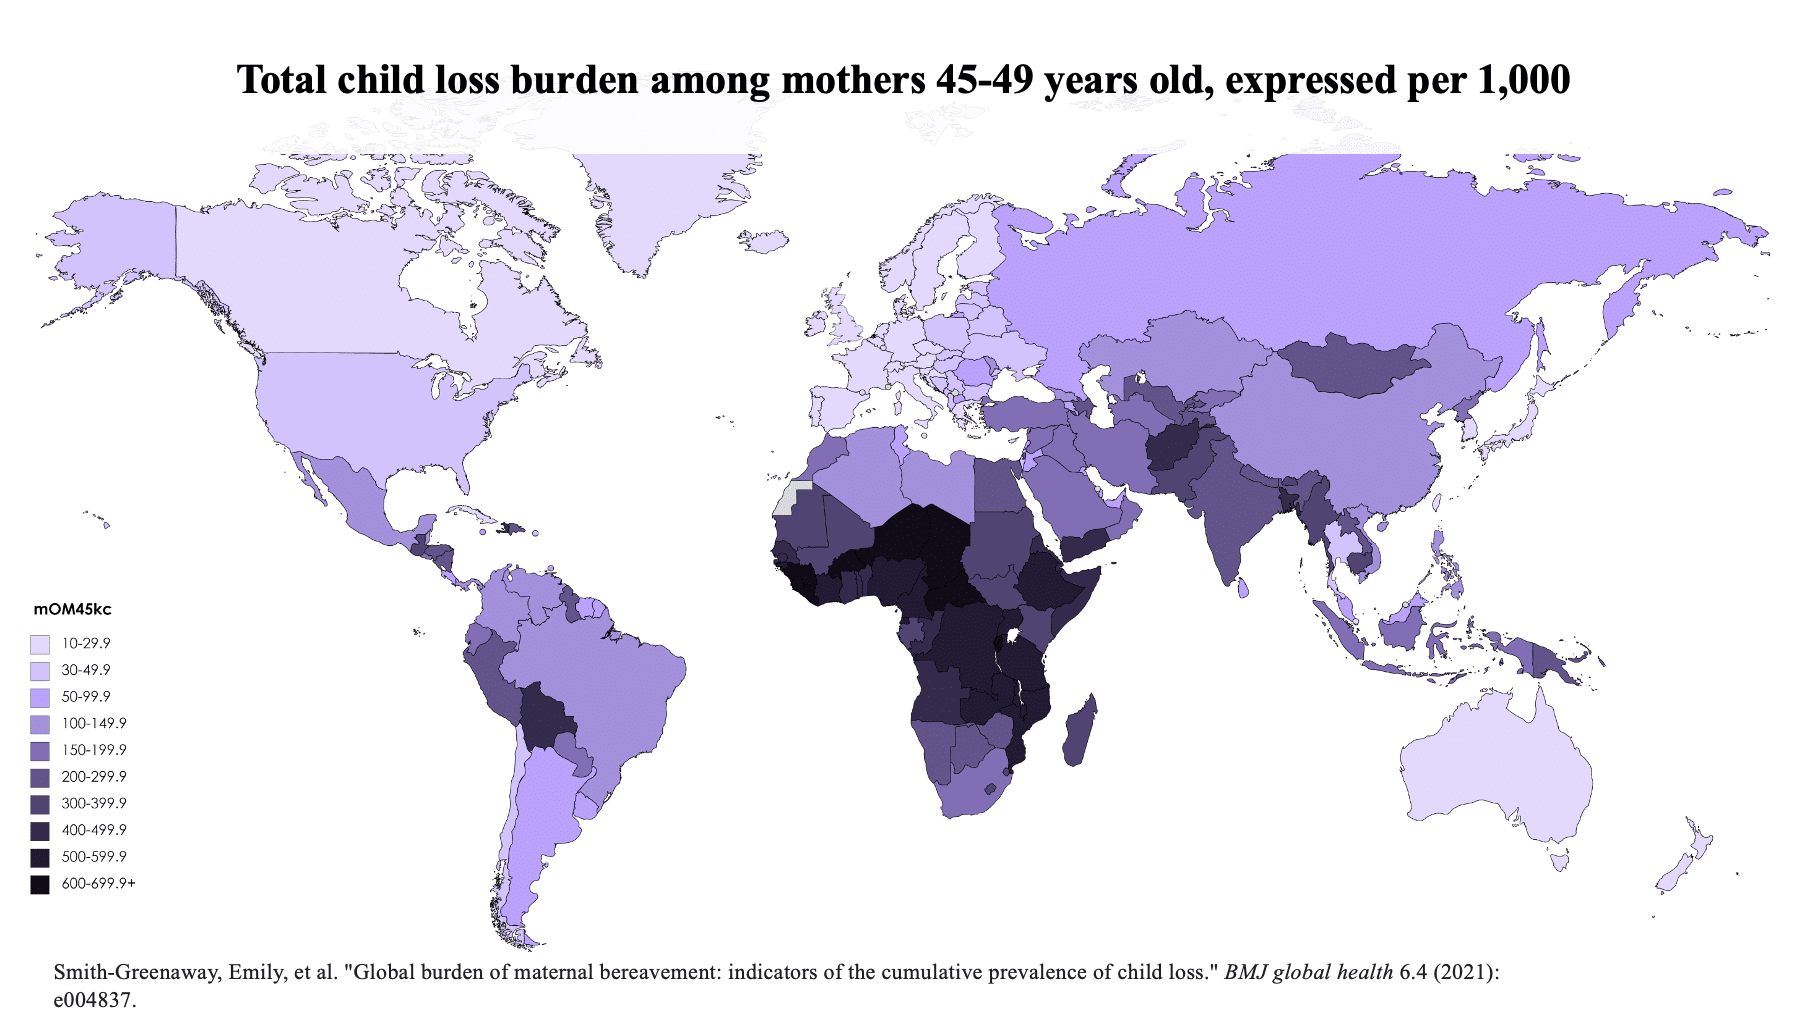 Total child loss burden among mothers 45-49 years old, expressed per 1,000